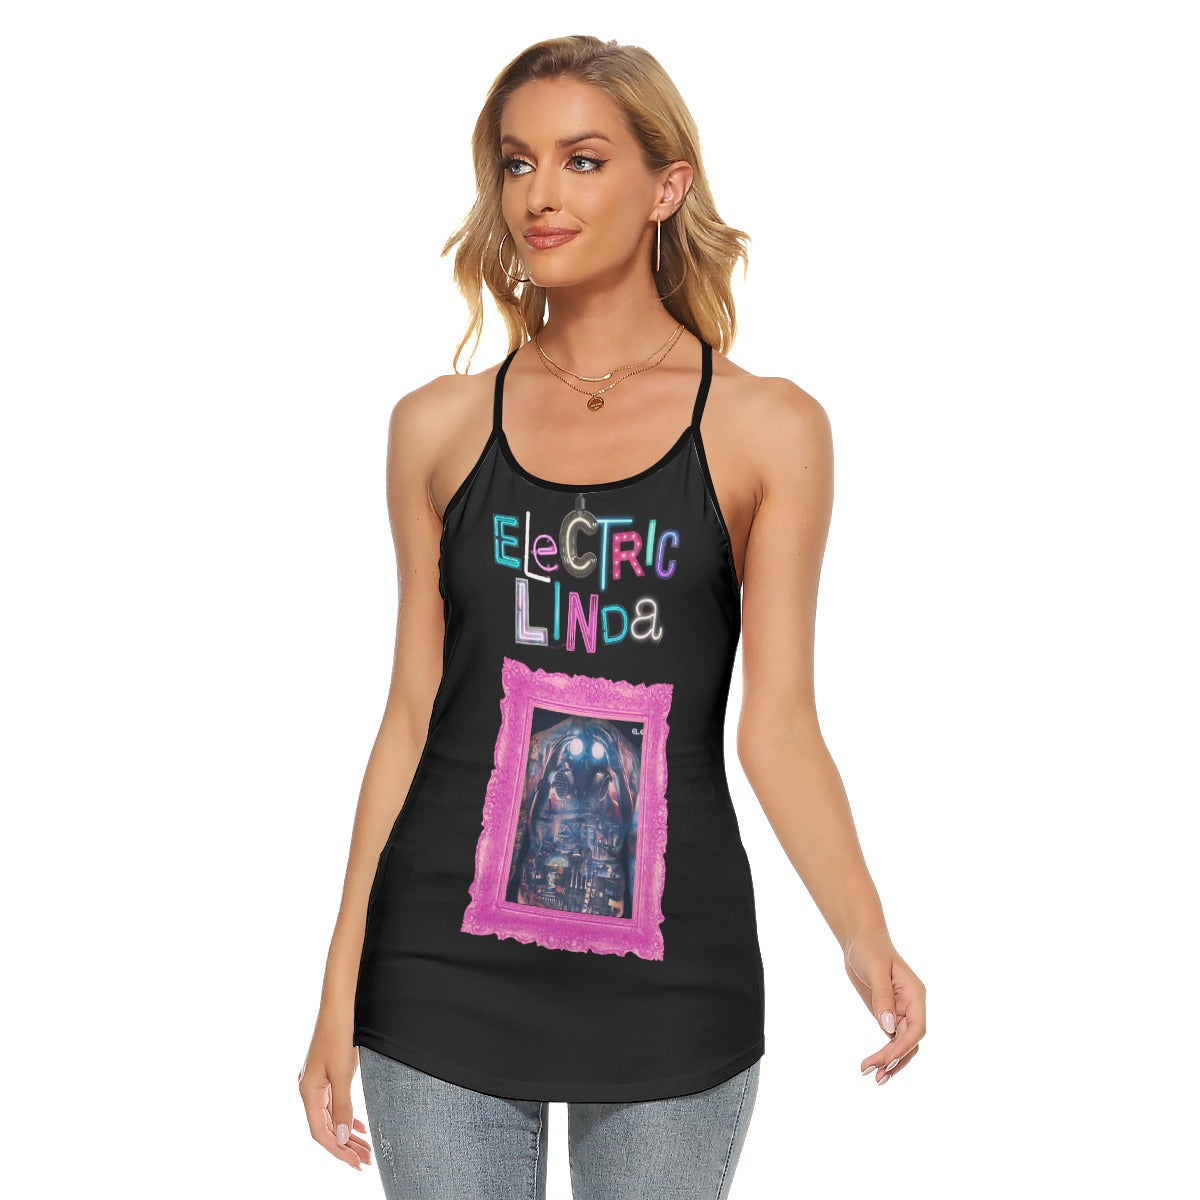 All-Over Print Women's Cut-out Rhombus Back Cami Tank Top - Electric Linda